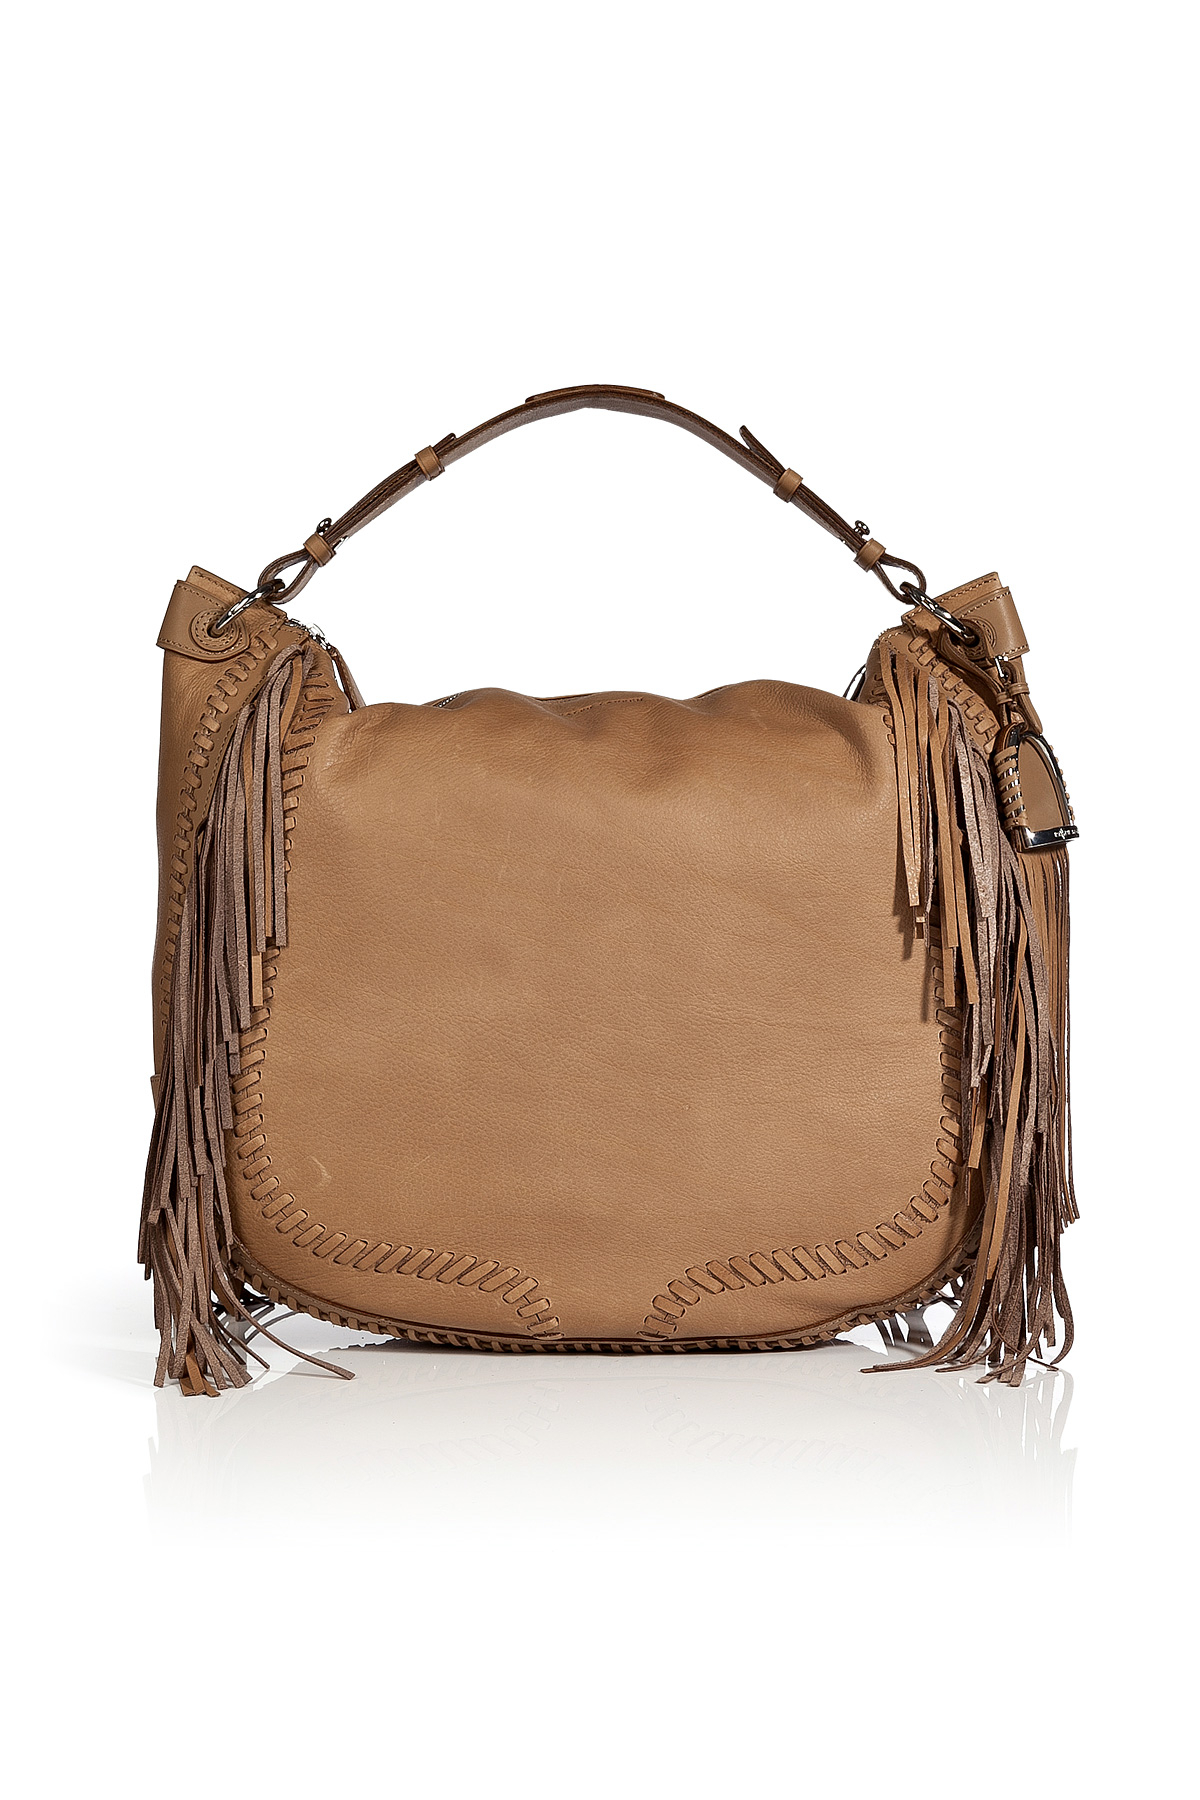 Ralph Lauren Collection Leather Whipstitch Hobo with Fringe Trim in ...